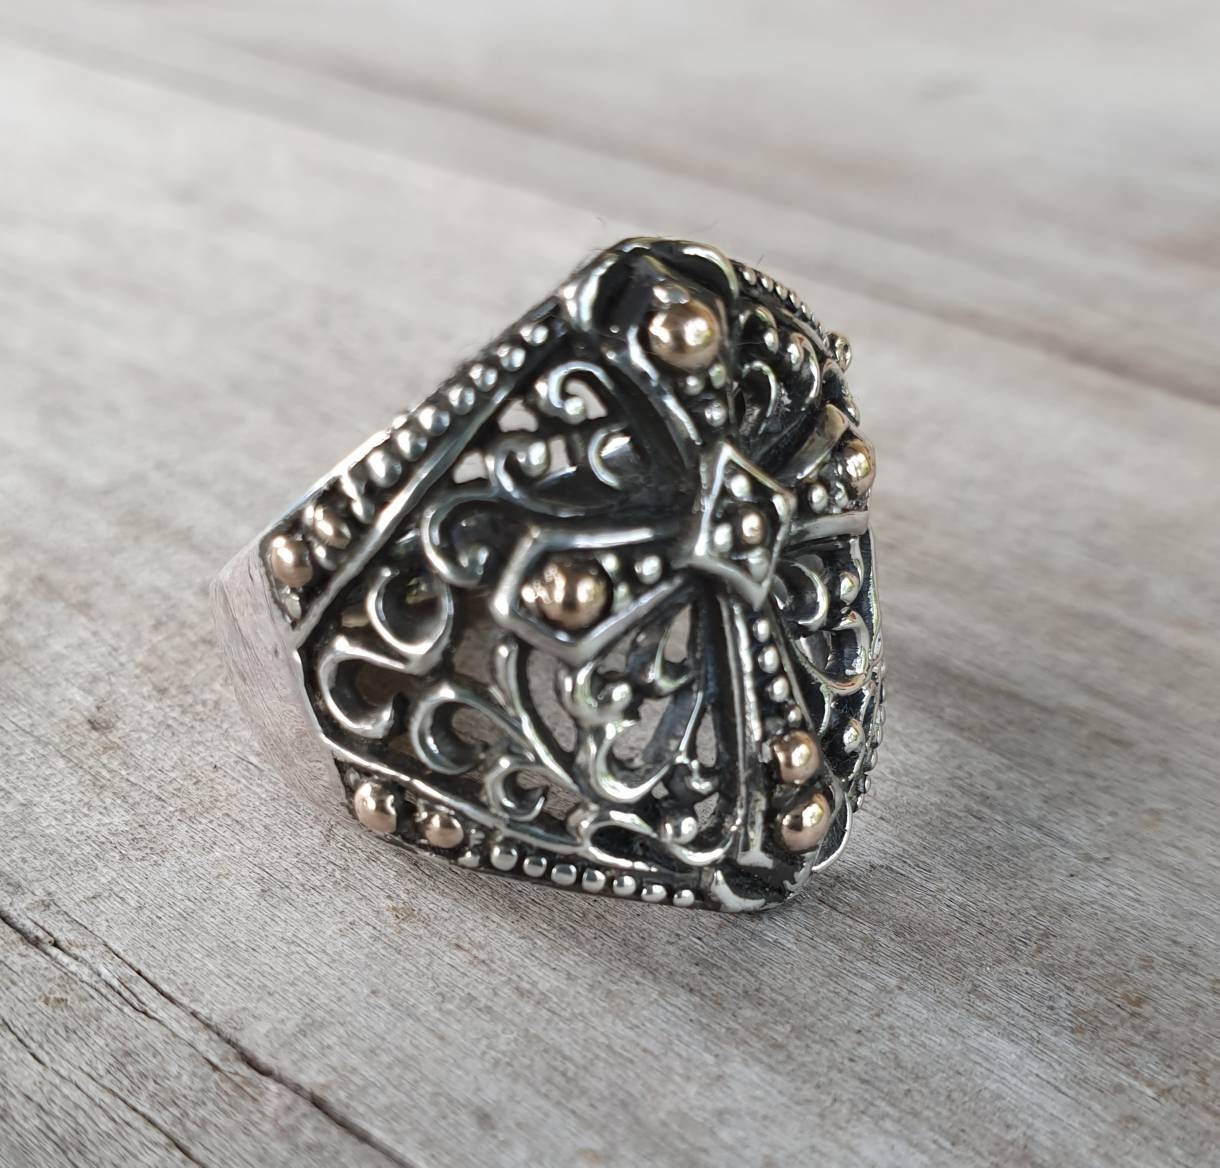 Two Tone Cross Ringsterling Silver10k Goldfilegree - Etsy